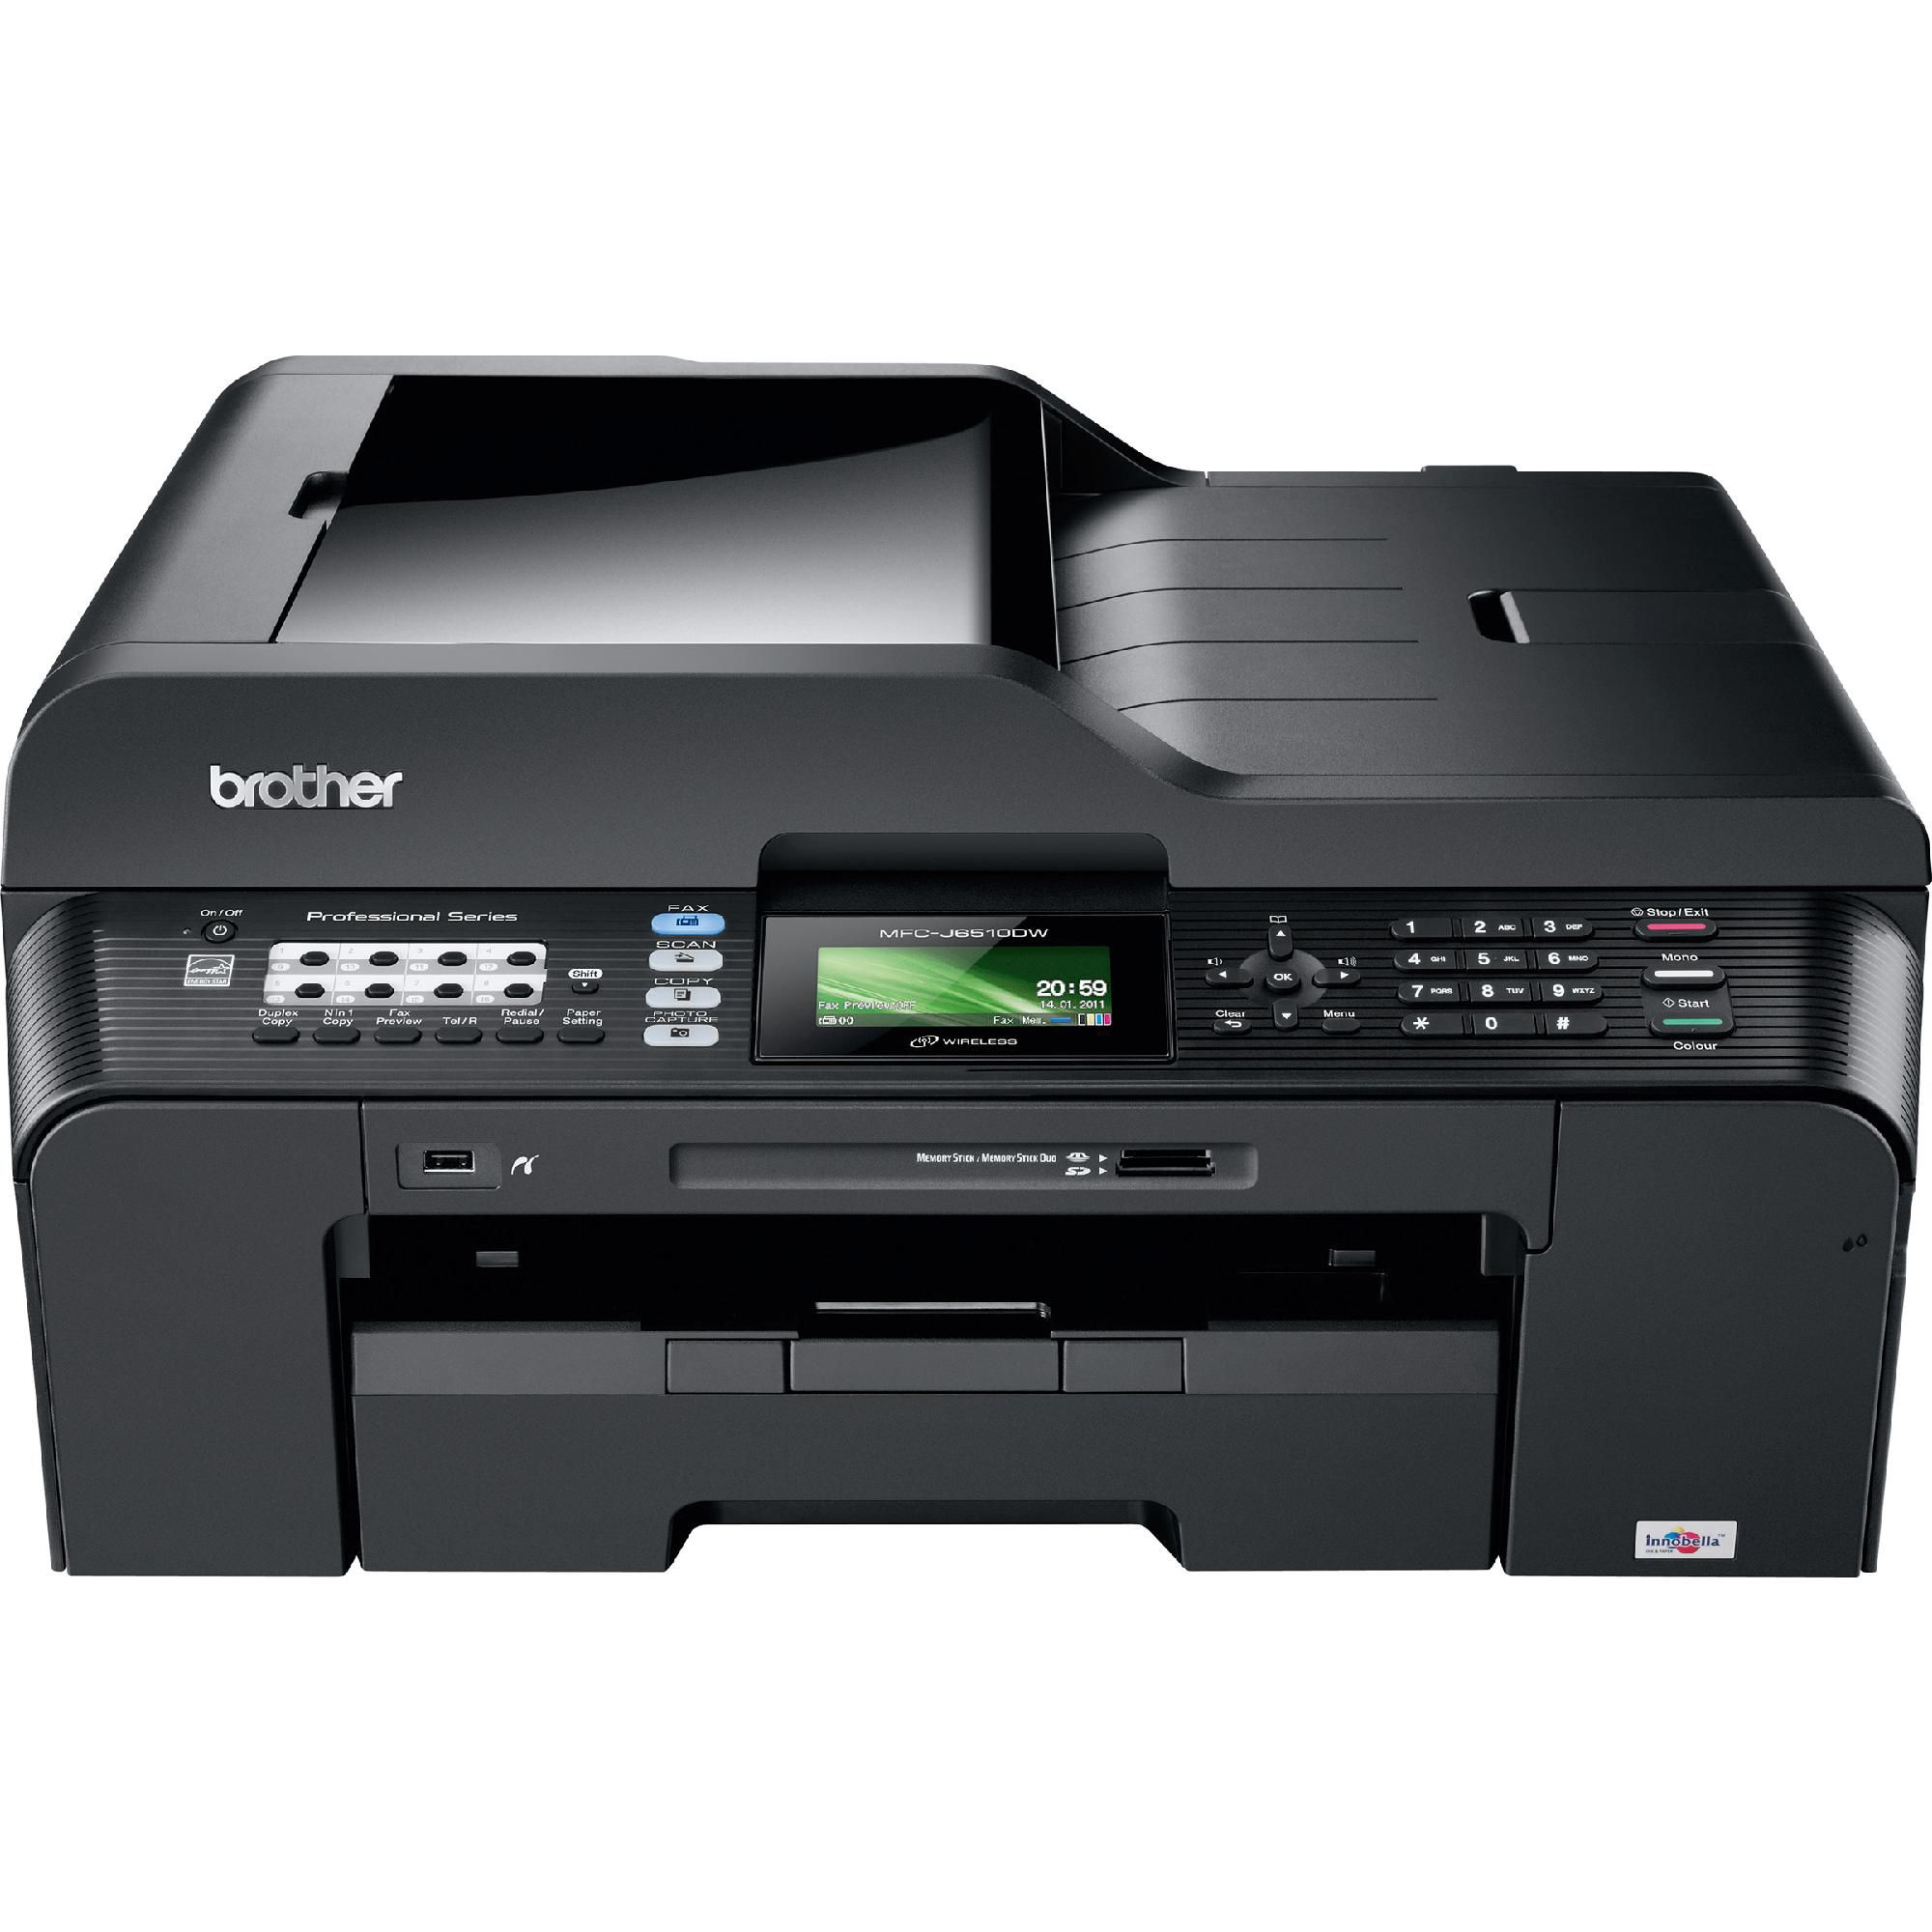 Brother MFC-J6510DW Professional Series Inkjet All in One Printer